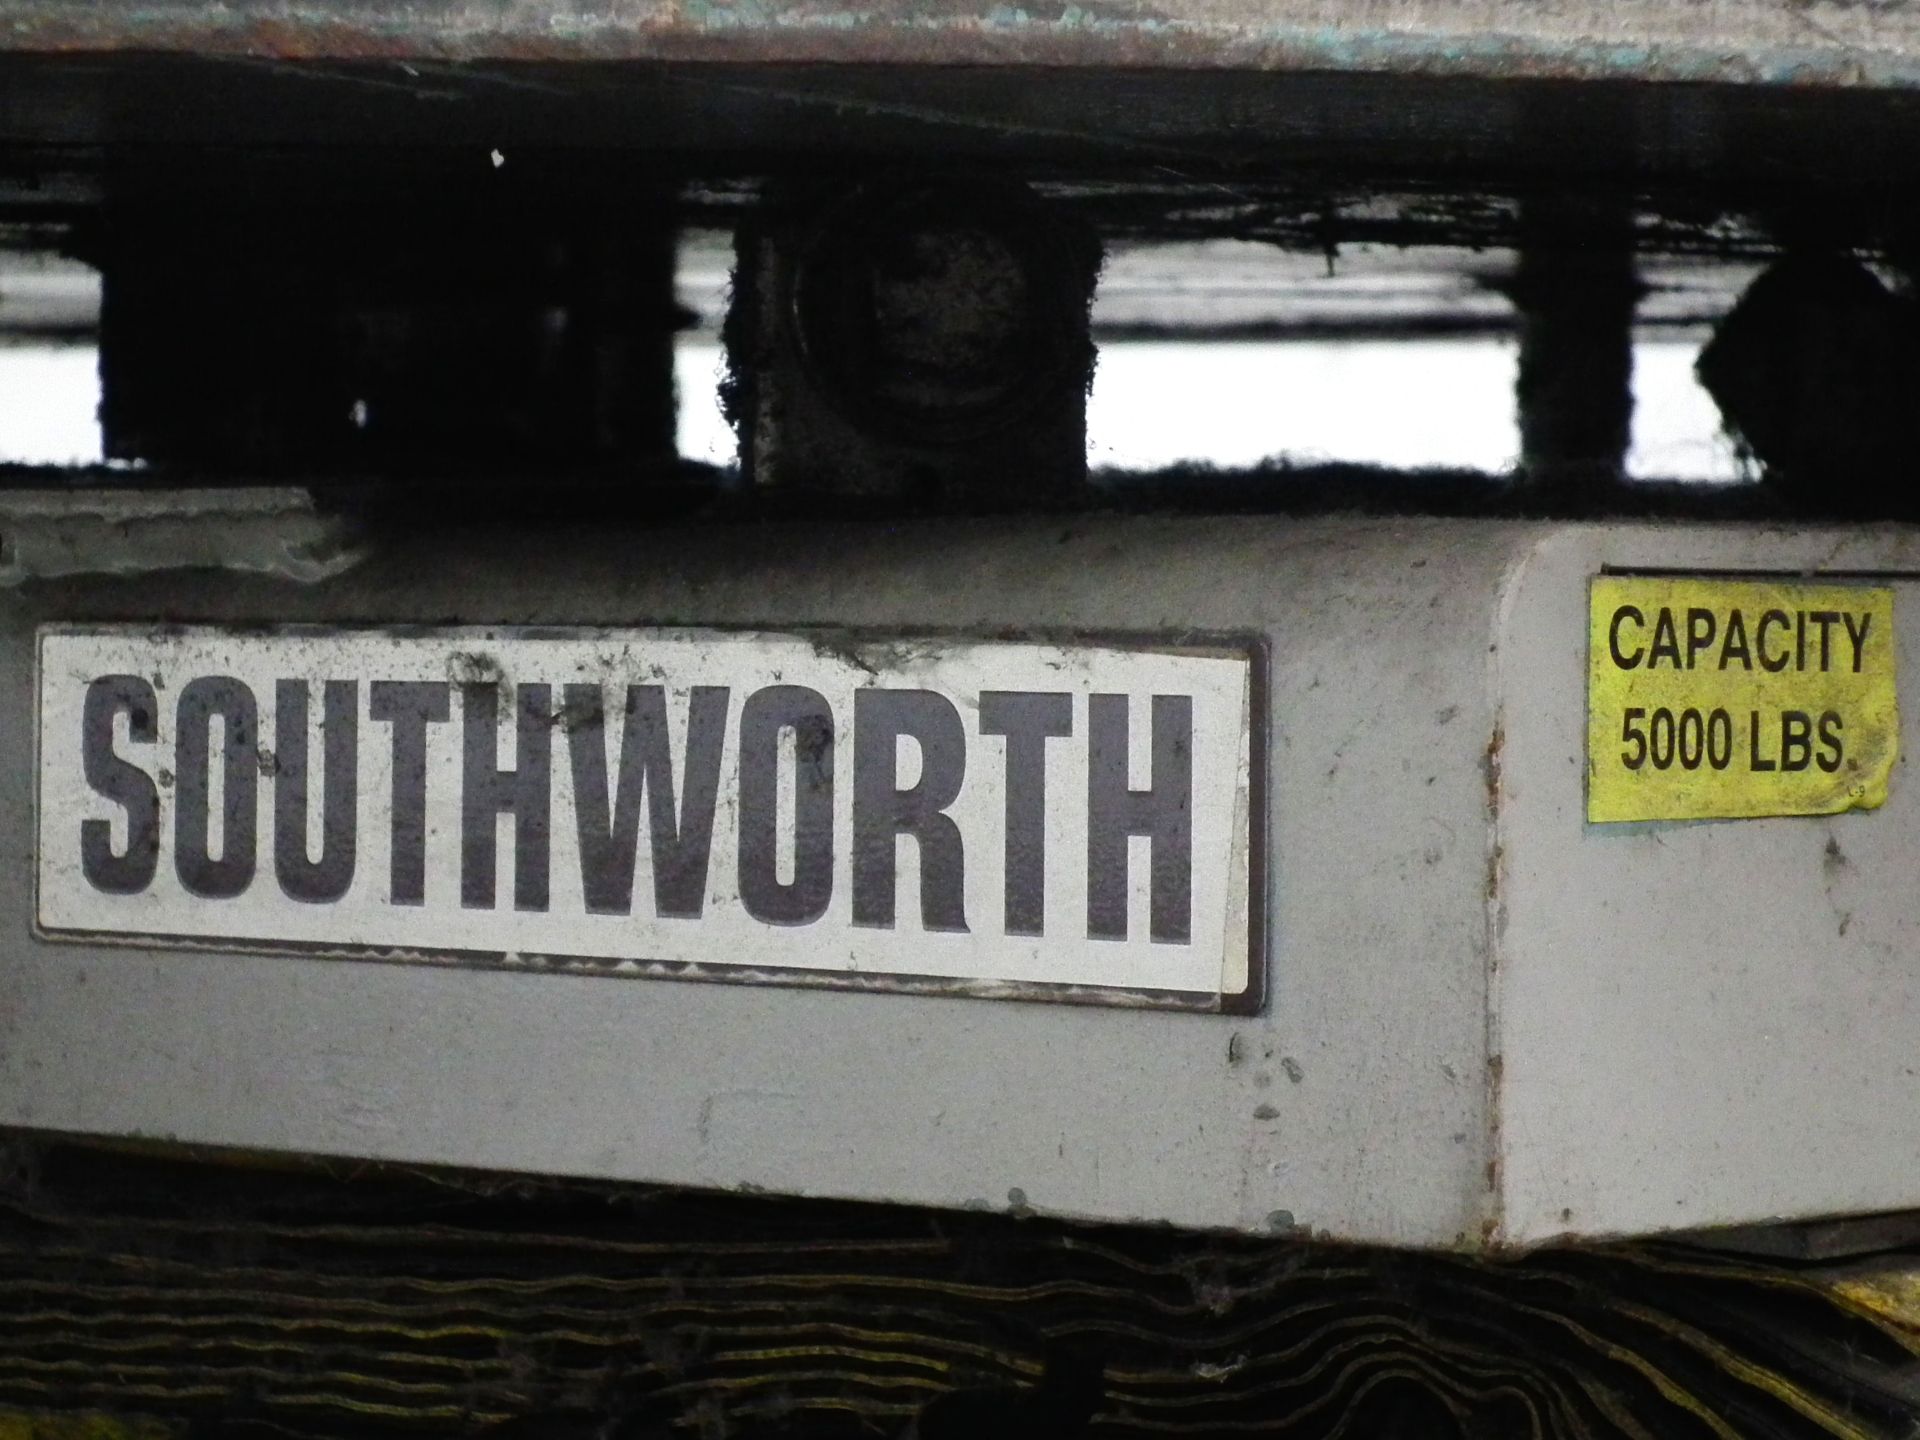 SouthWorth 69" Dia Hand Palletizing Turntable Lift A6496 - Image 7 of 7